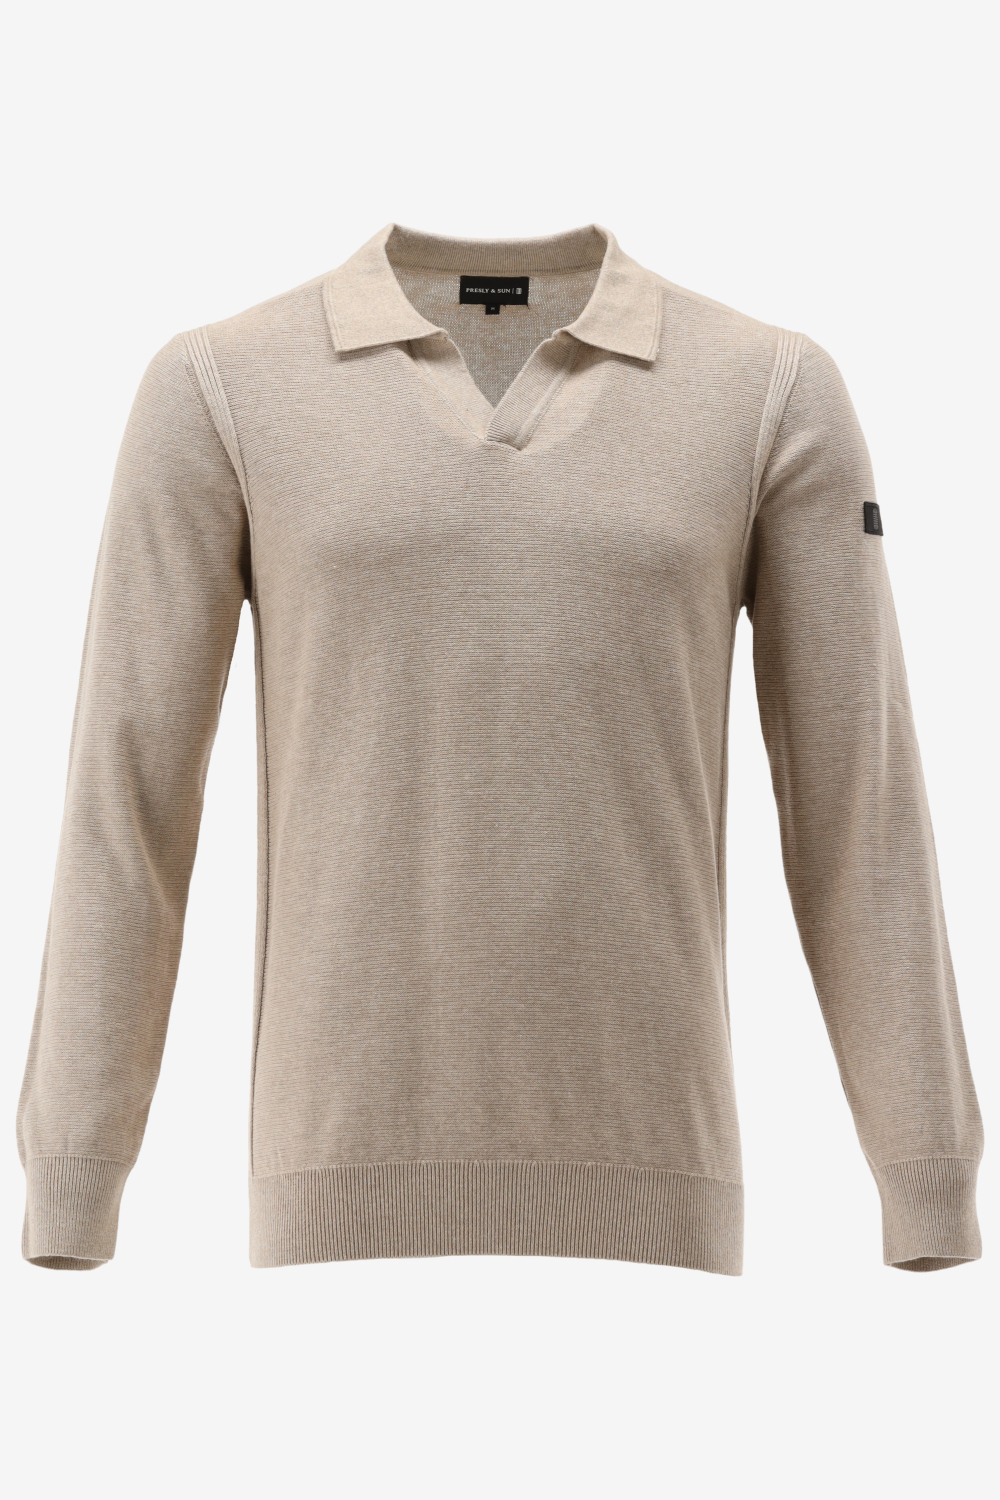 Presly & Sun - Heren open polo ribbed - Charles - Taupe - M